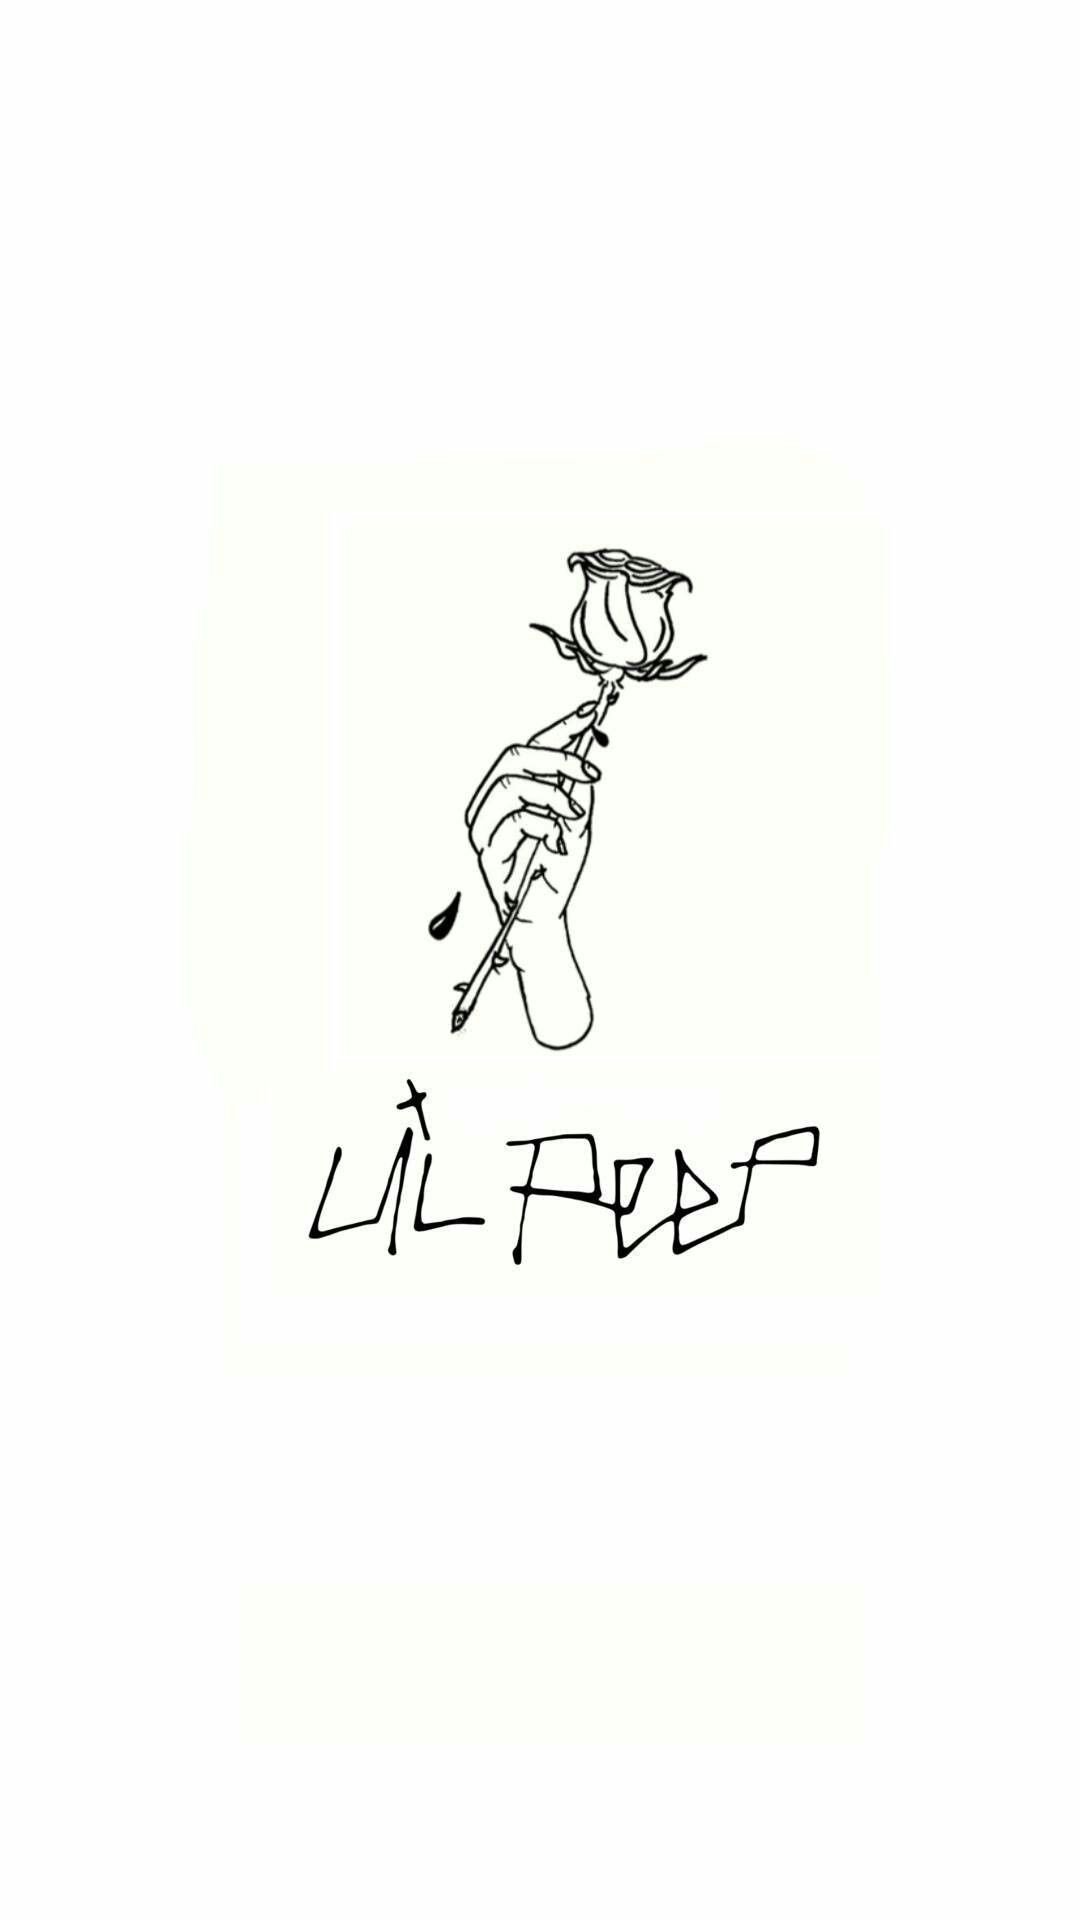 lil peep crybaby album cover drawings